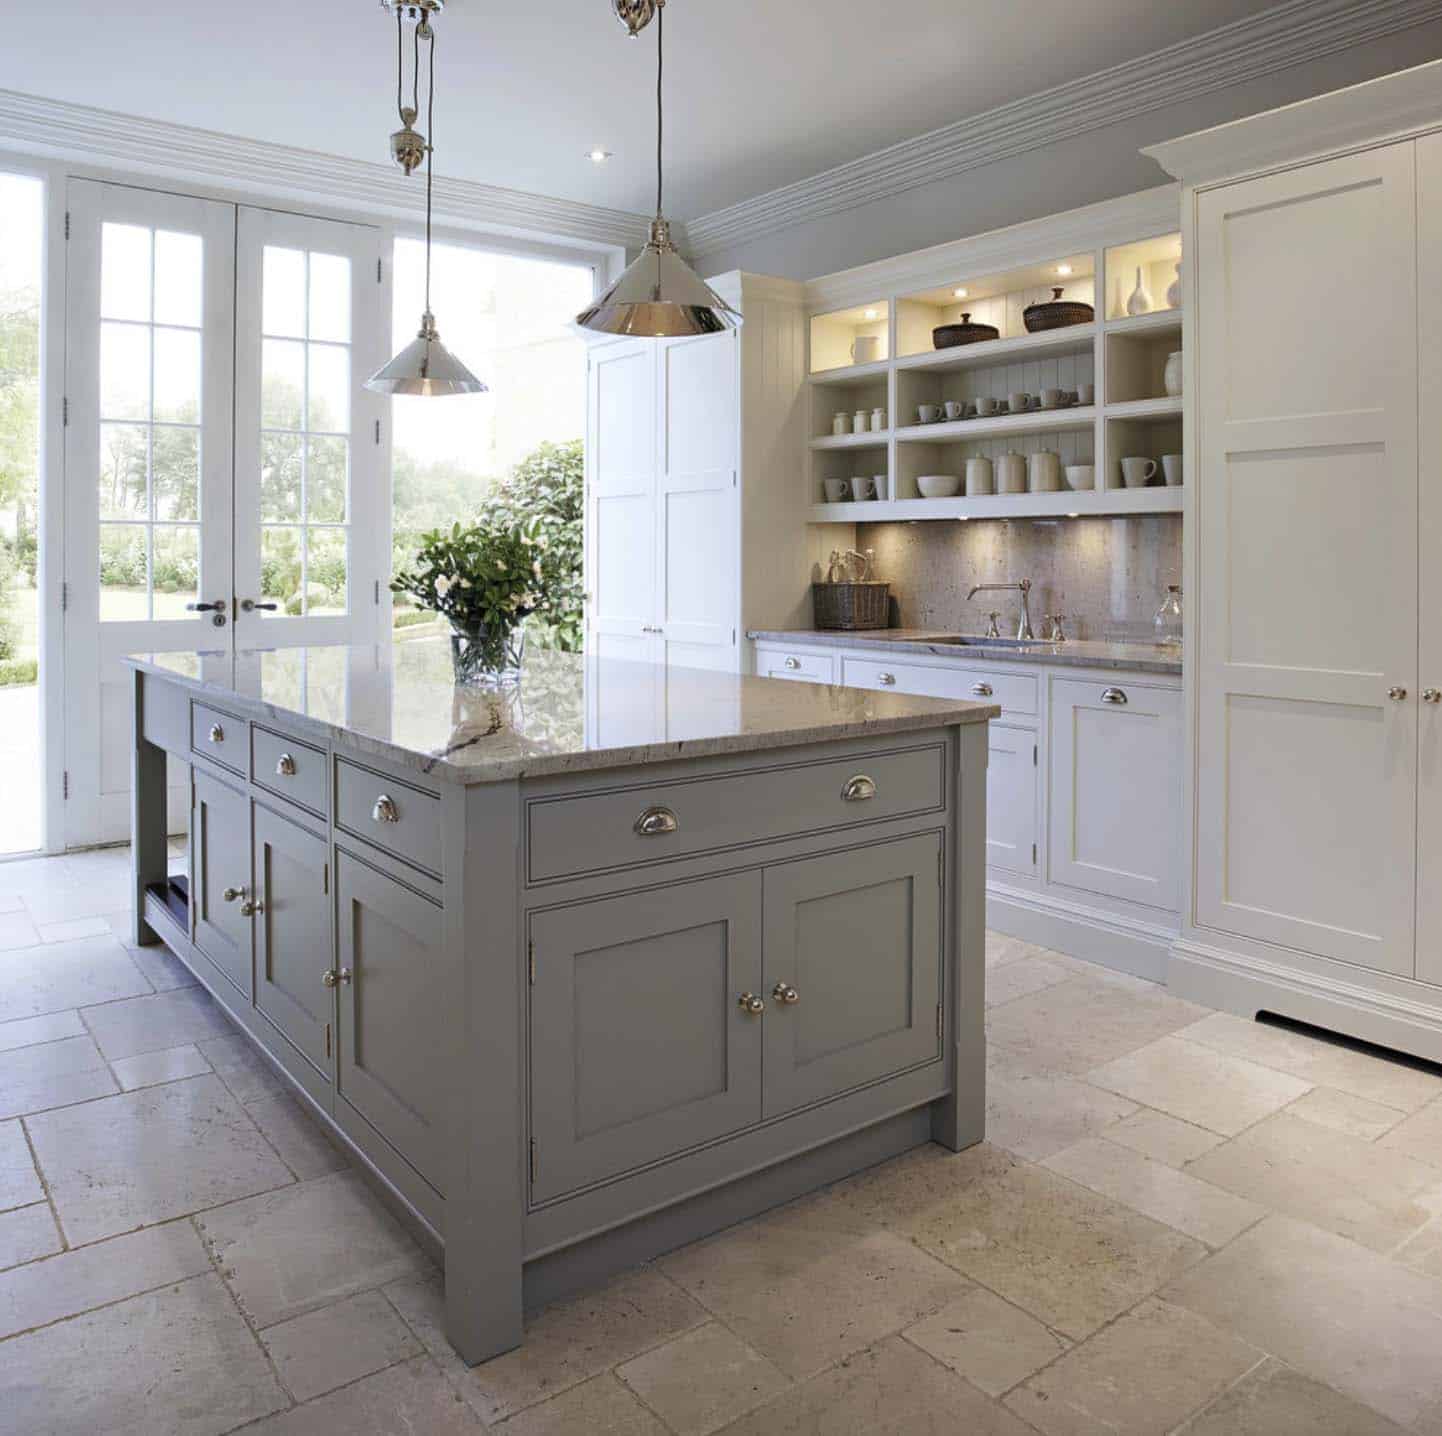 30 Beautiful And Inspiring Light Filled Kitchens With White